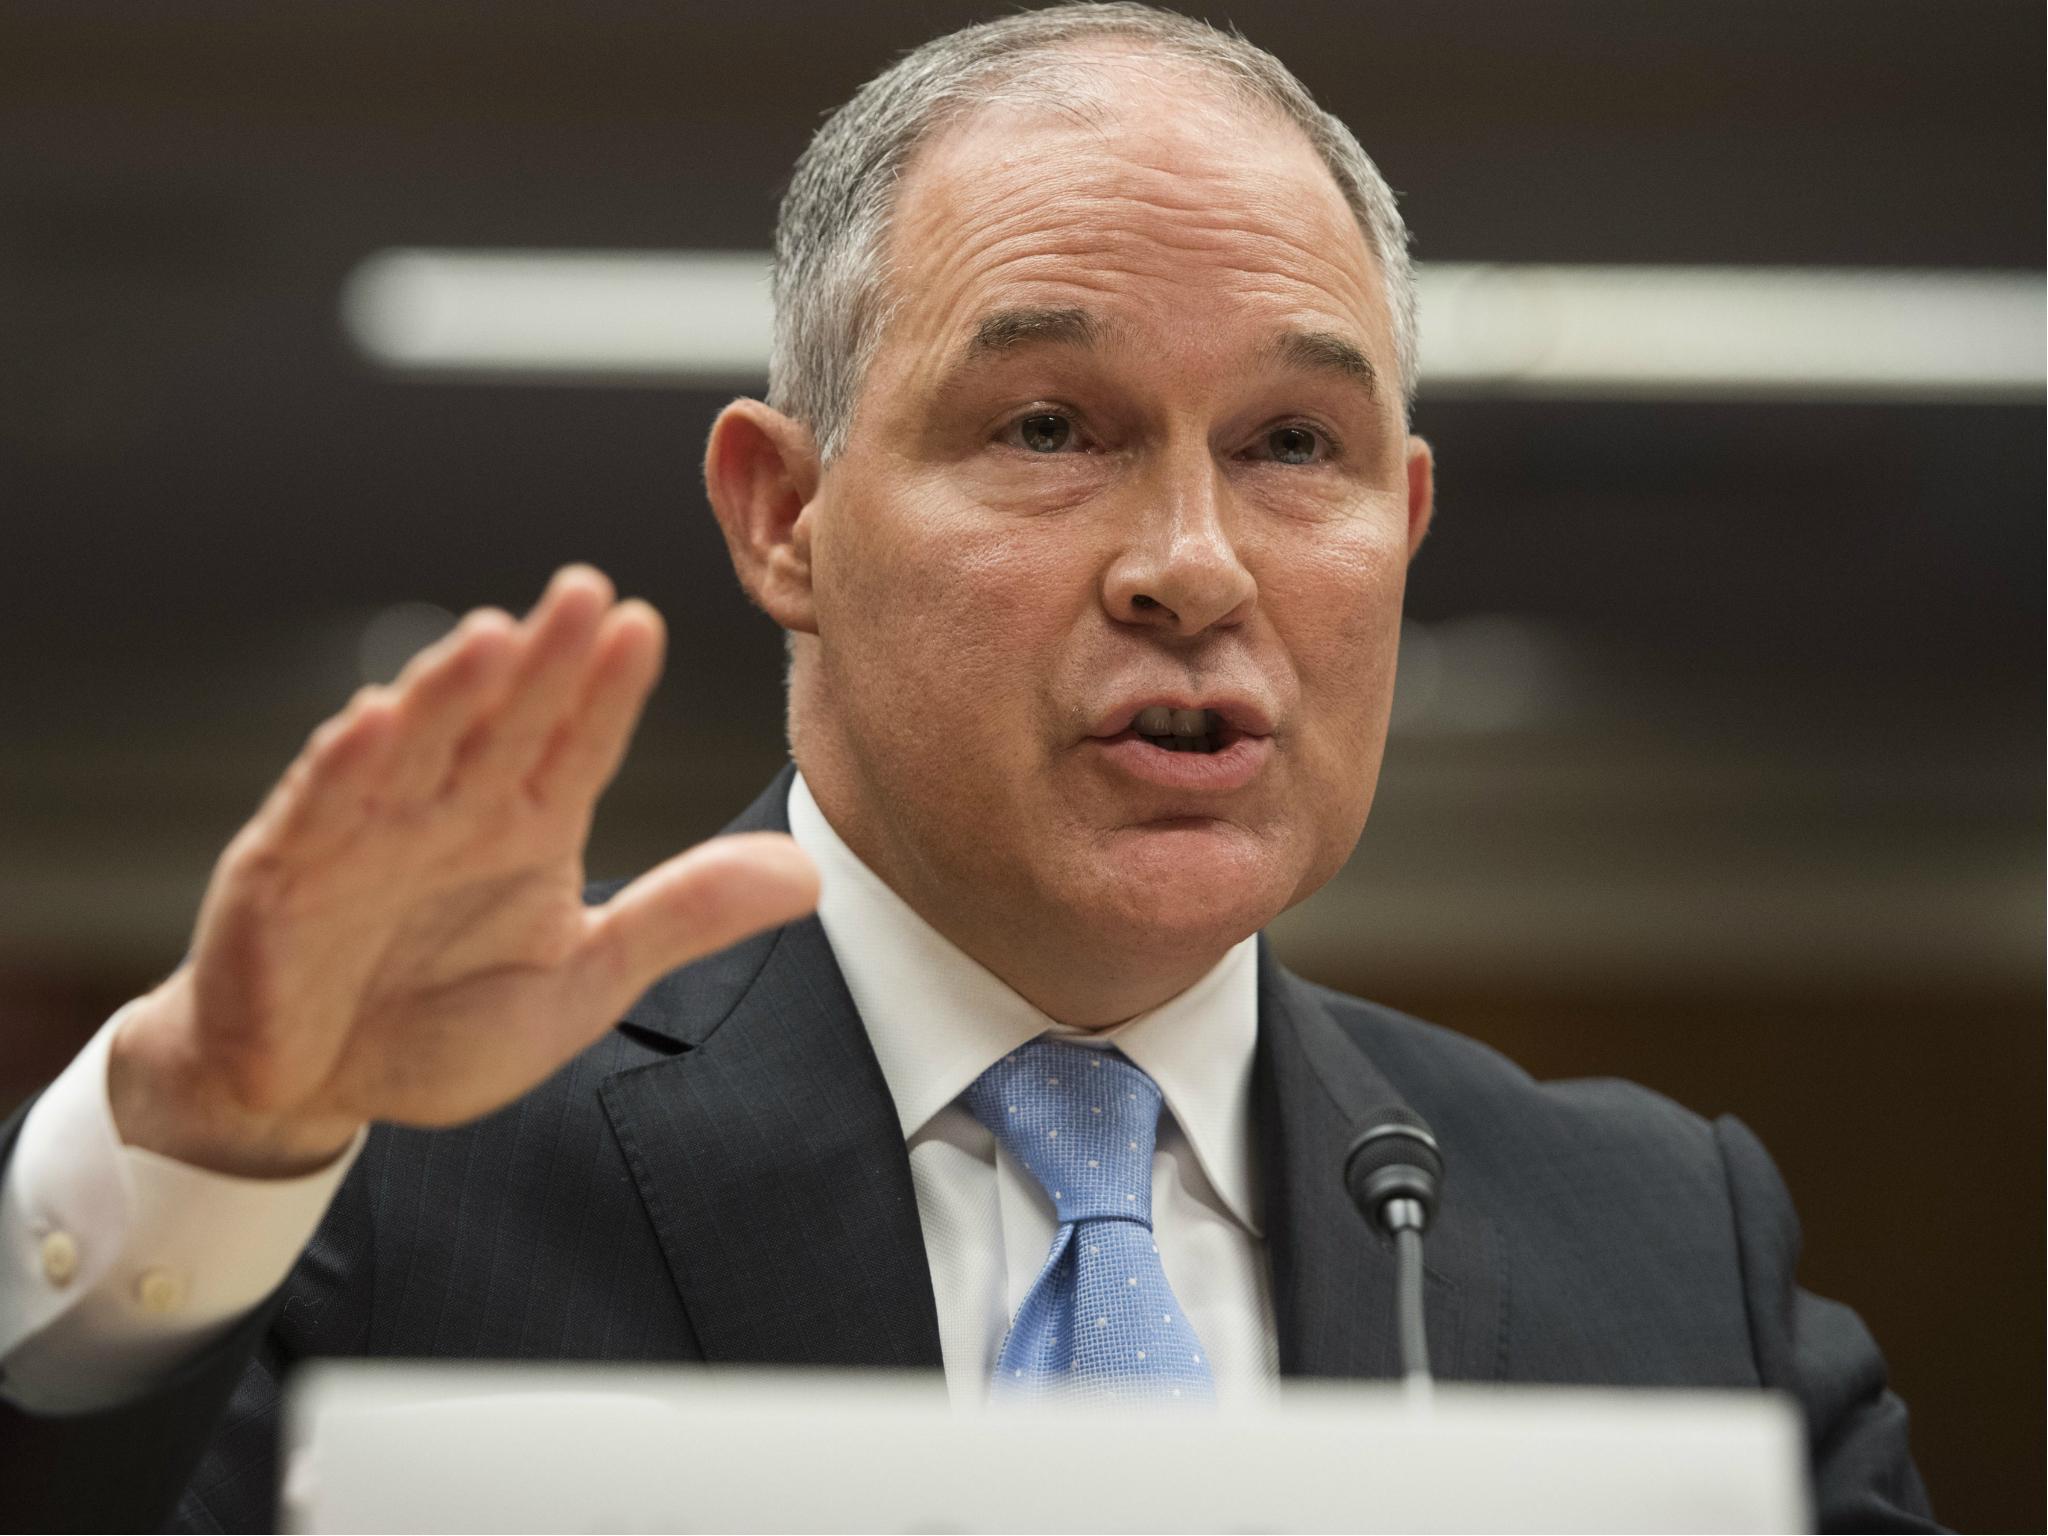 Environmental Protection Agency (EPA) Administrator Scott Pruitt testifies about the fiscal year 2018 budget during a Senate hearing.